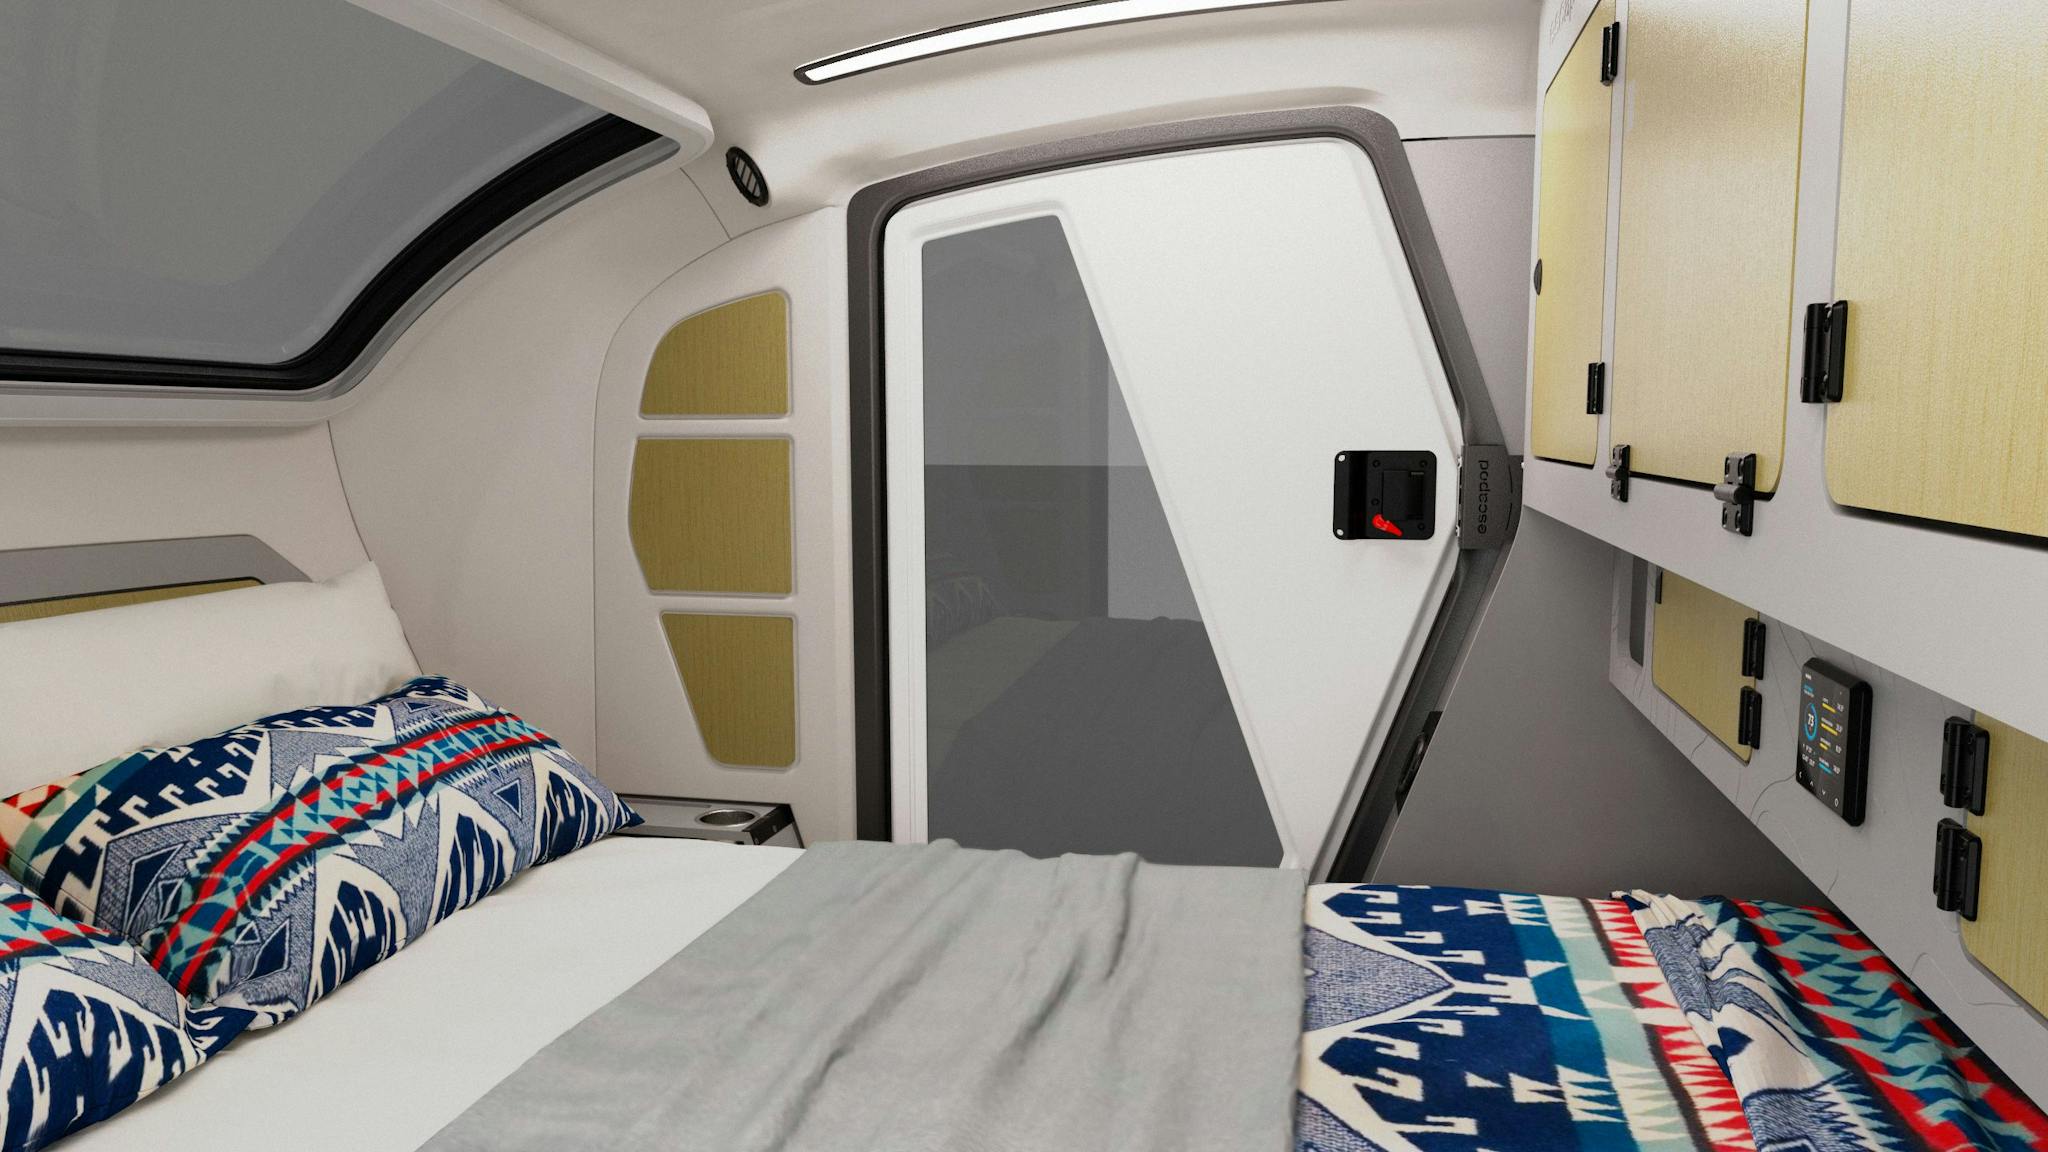 A look inside the cabin of the TOPO2 teardrop trailer. The queen-sized bed has a blue and red quilt covering it with a grey blanket in the middle.